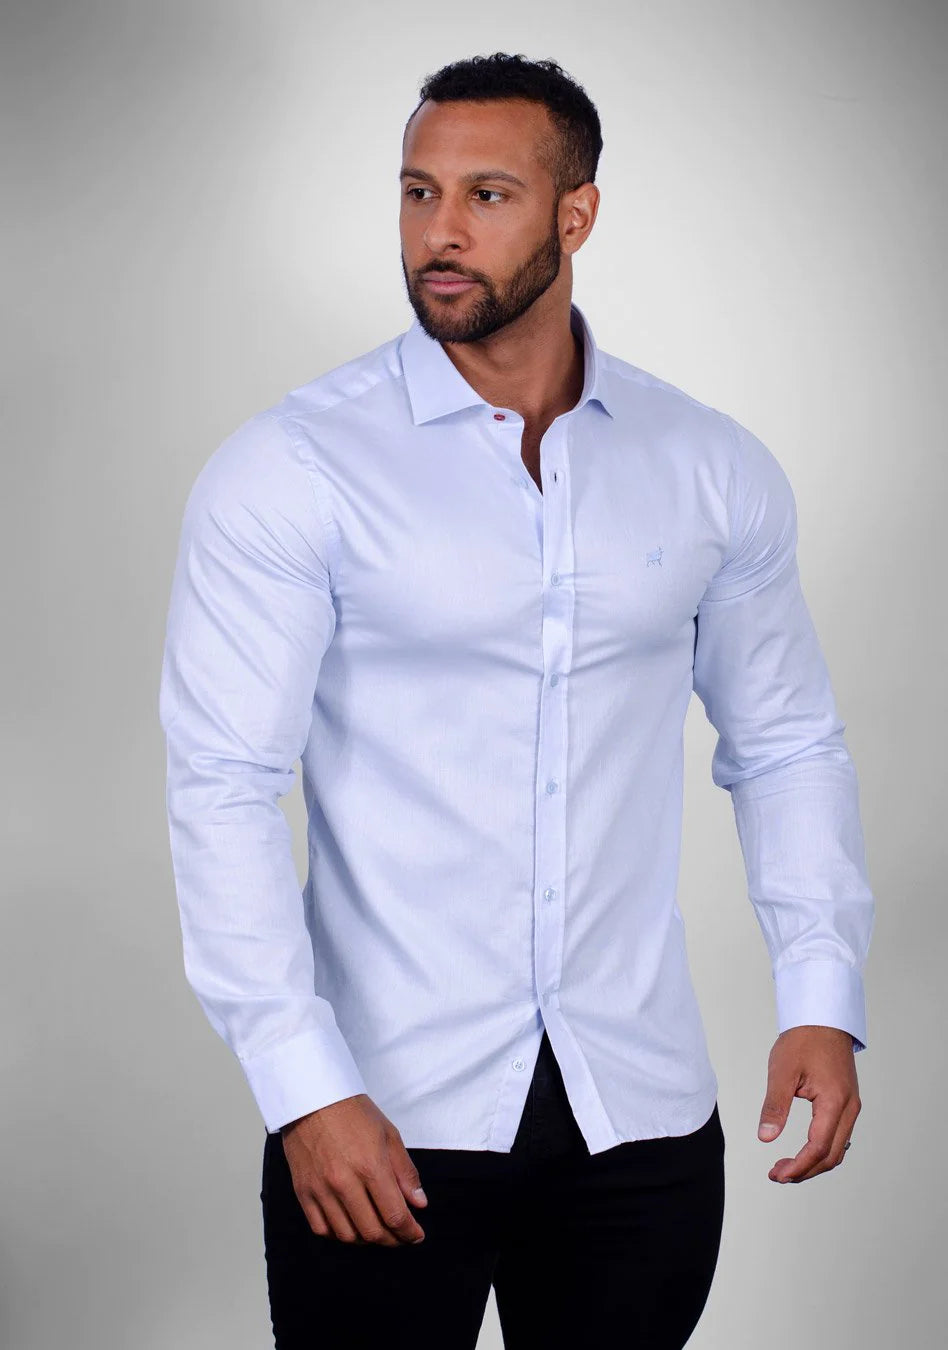 Sky Blue muscle fit shirt on an athletically built model, showcasing the athletic fit design that enhances physique, with stretch fabric for comfort and mobility